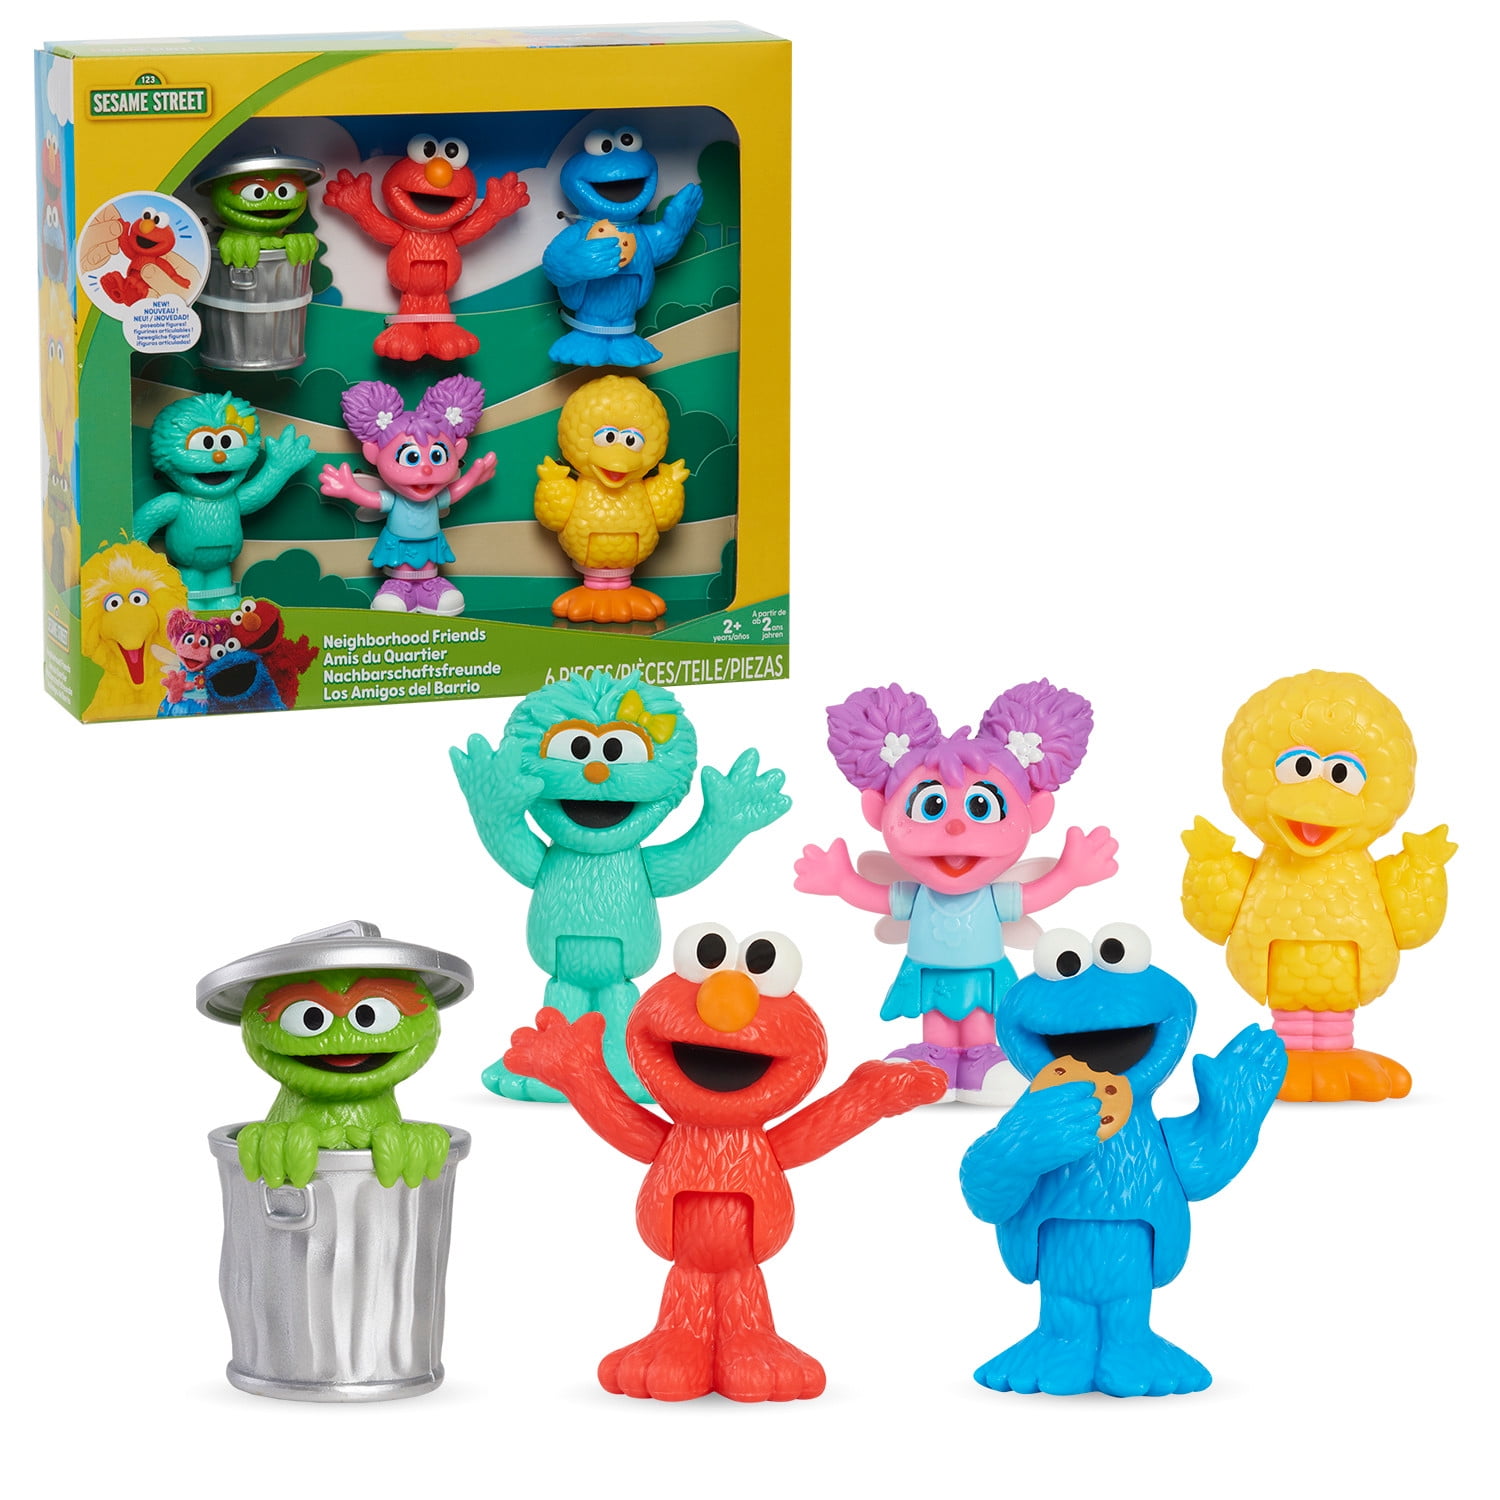 Sesame Street Neighborhood Friends, 6-piece Poseable Figurines, Officially Licensed Kids Toys for Ages 2 Up, Gifts and Presents